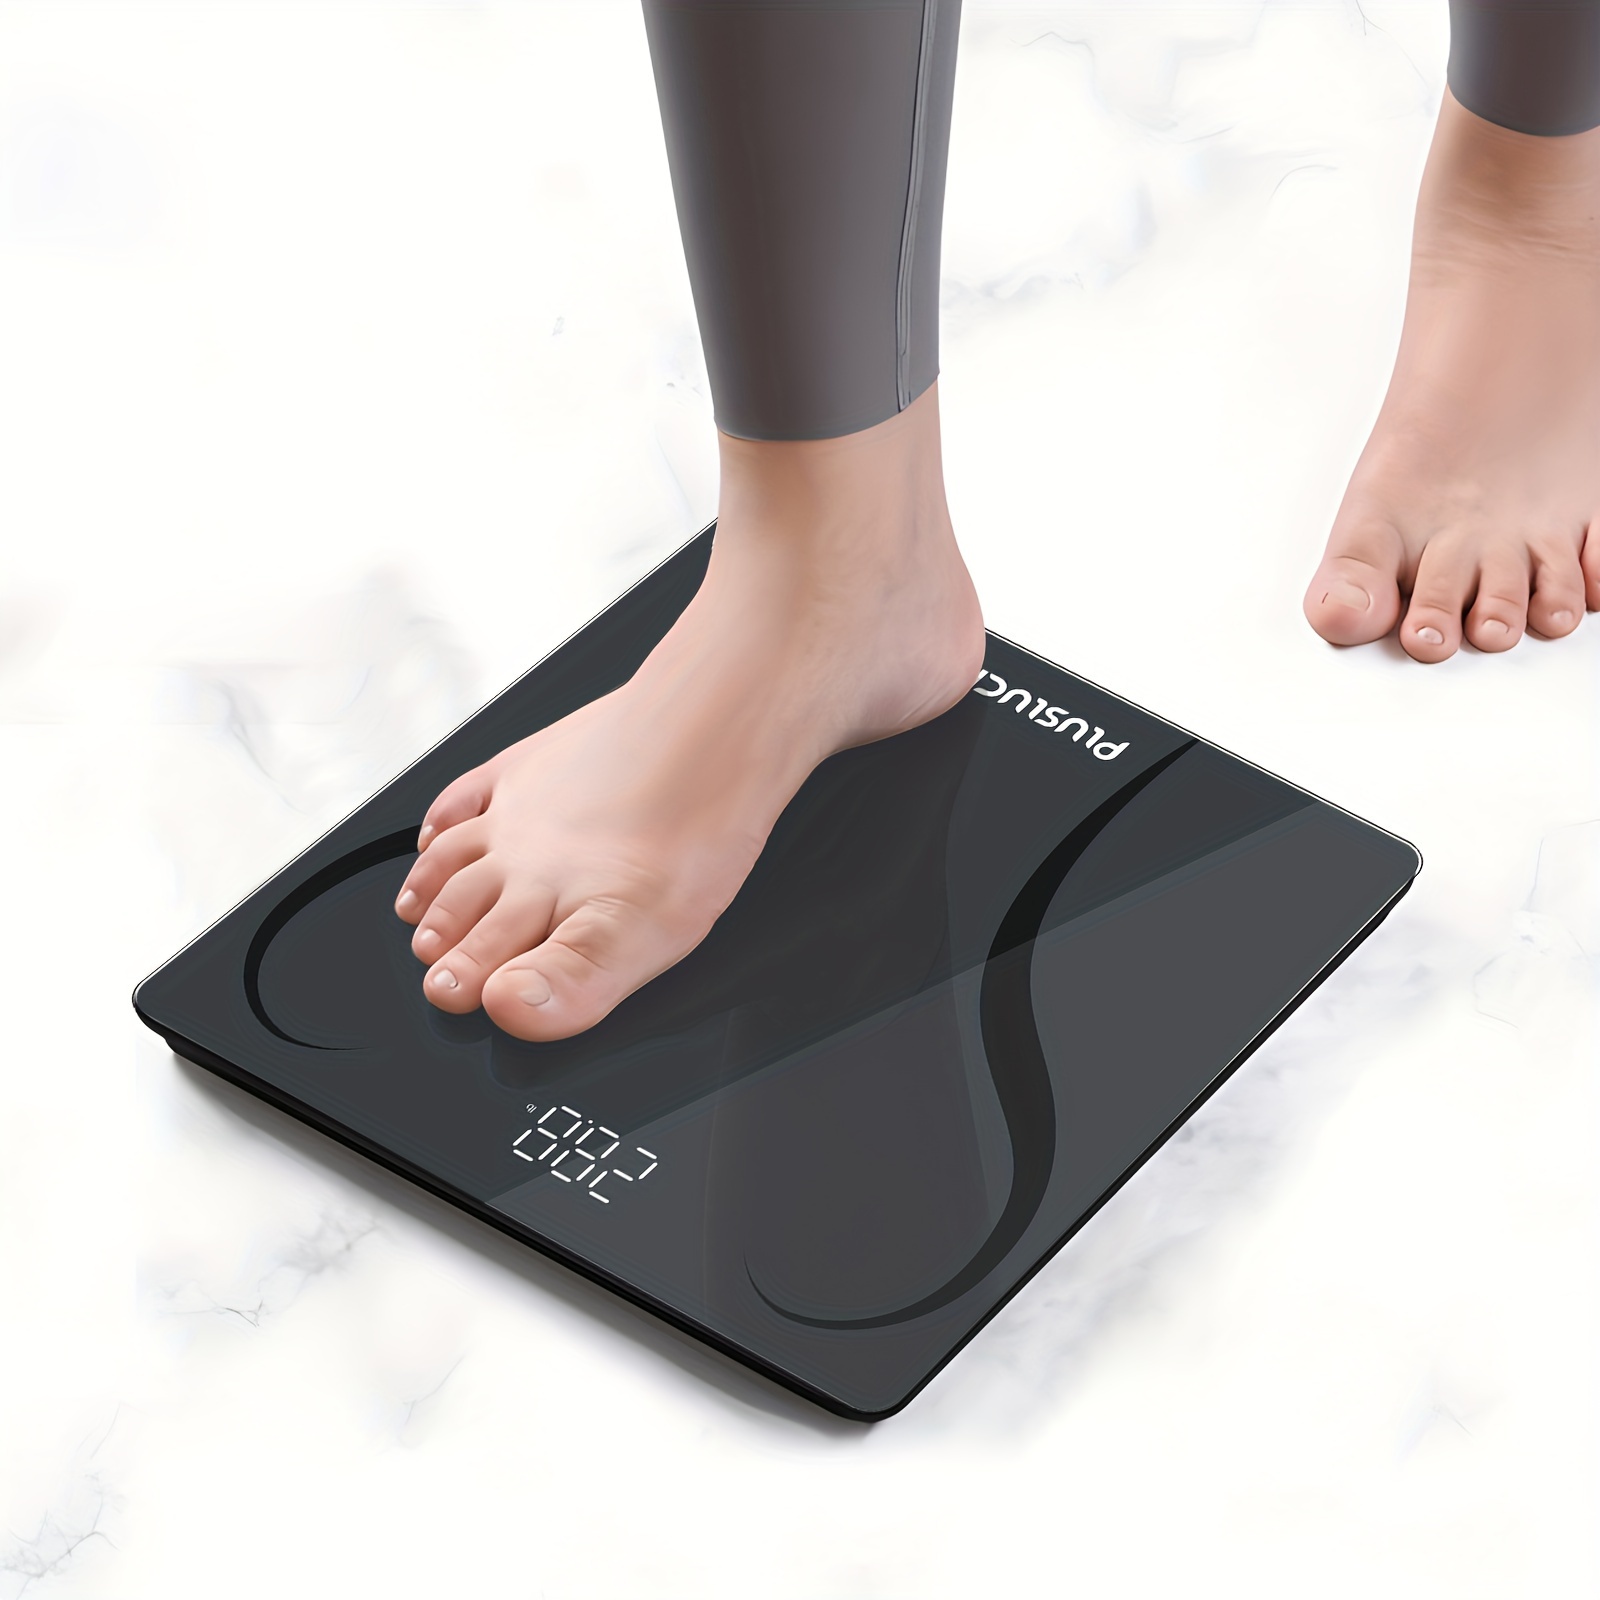 

Bathroom Scale For Body Weight, Weighing Scale For People, Body Scale With Bright Led Display, Most Accurate To 0.1lb, Batteries Included, 400 Lbs/180kg Capacity